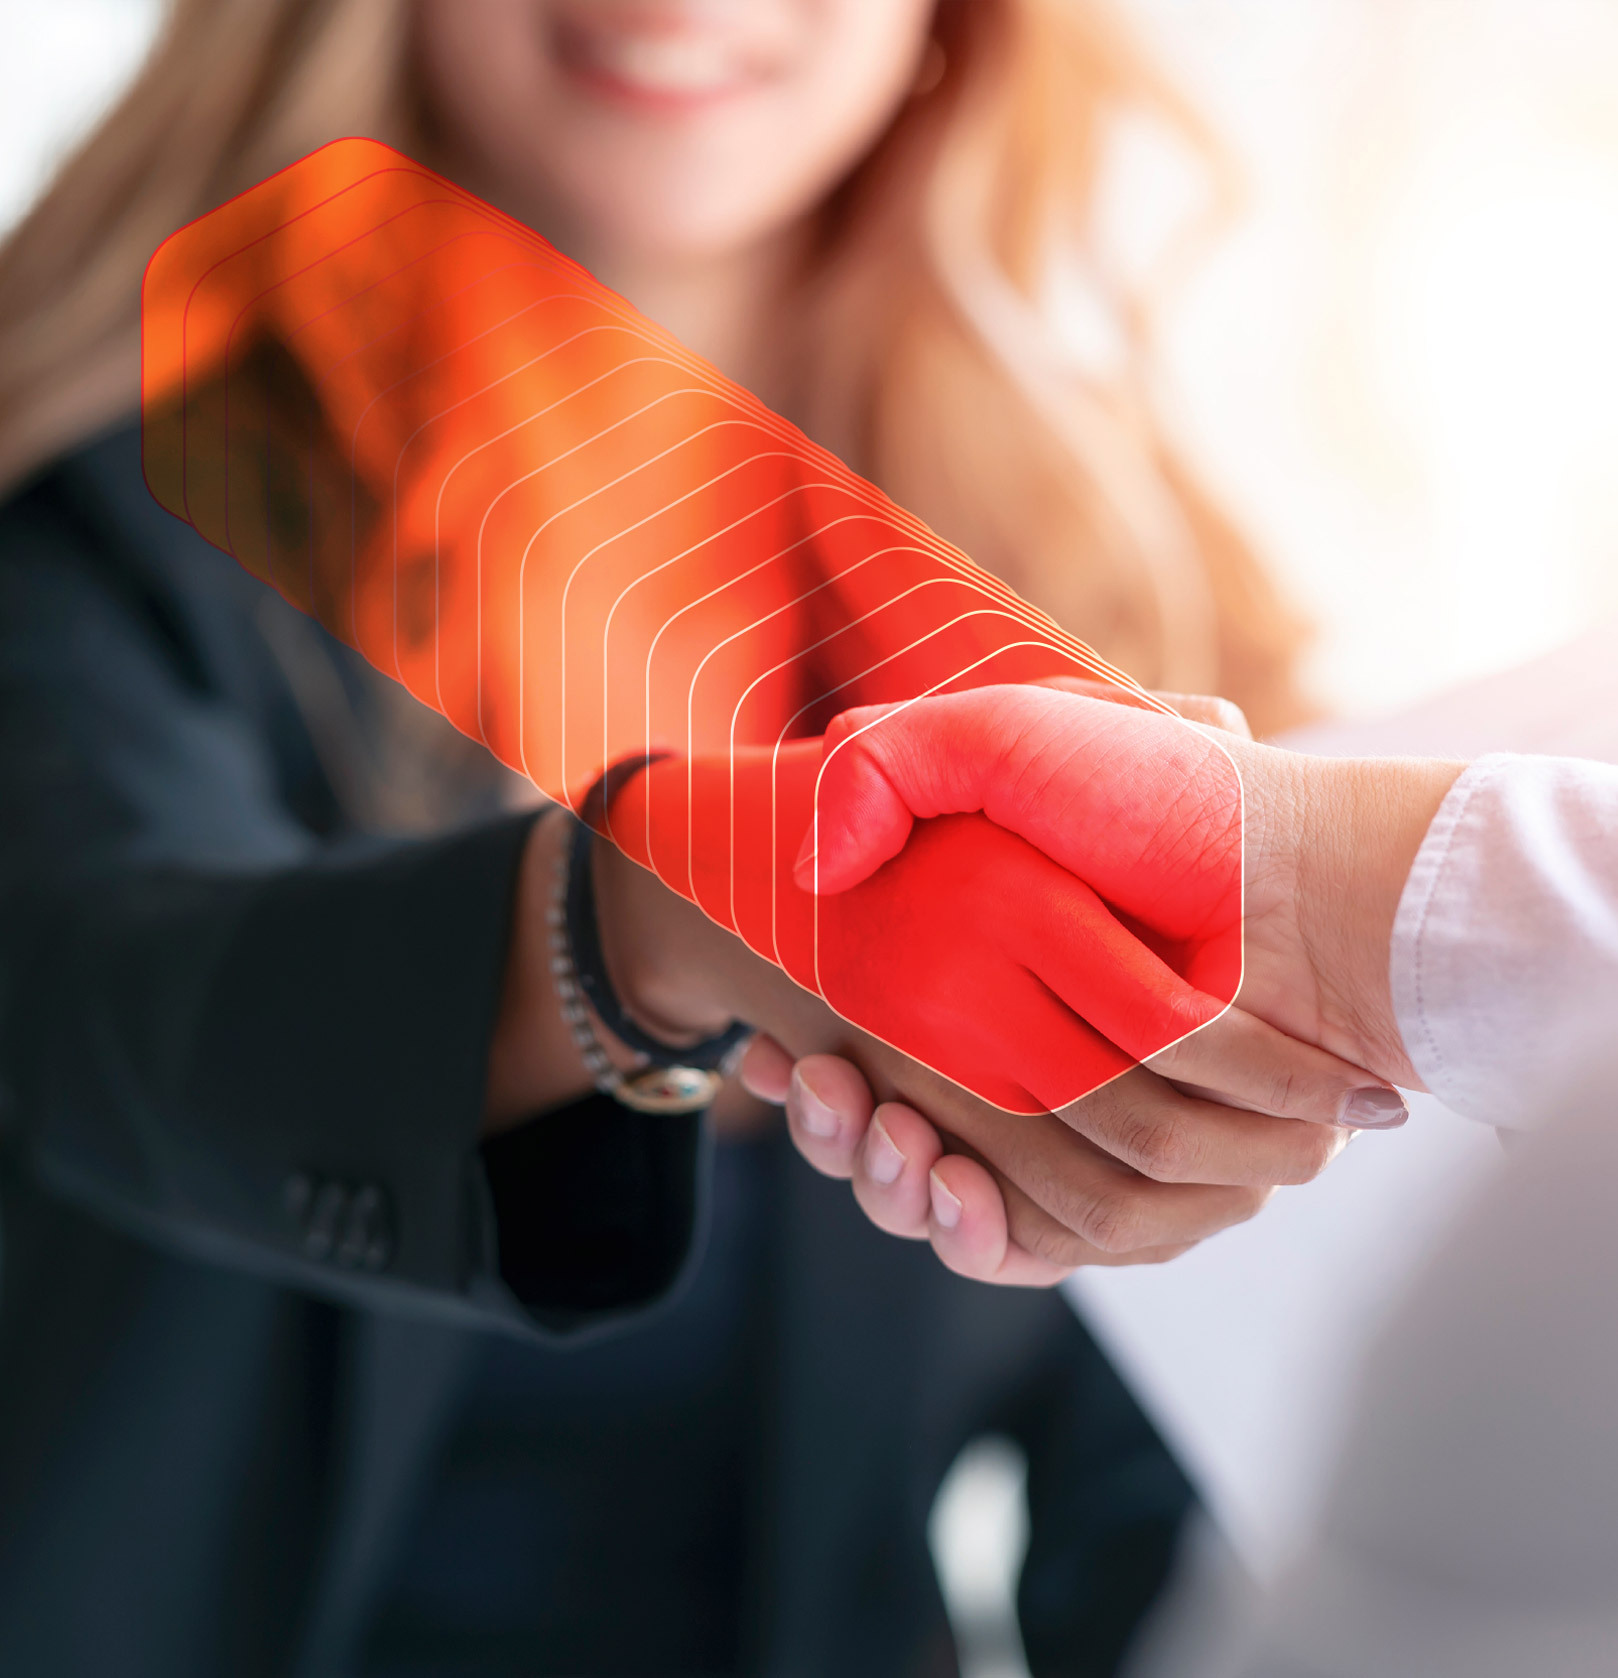 Business people shaking hands with a red hand, symbolizing a unique agreement or a warning sign.